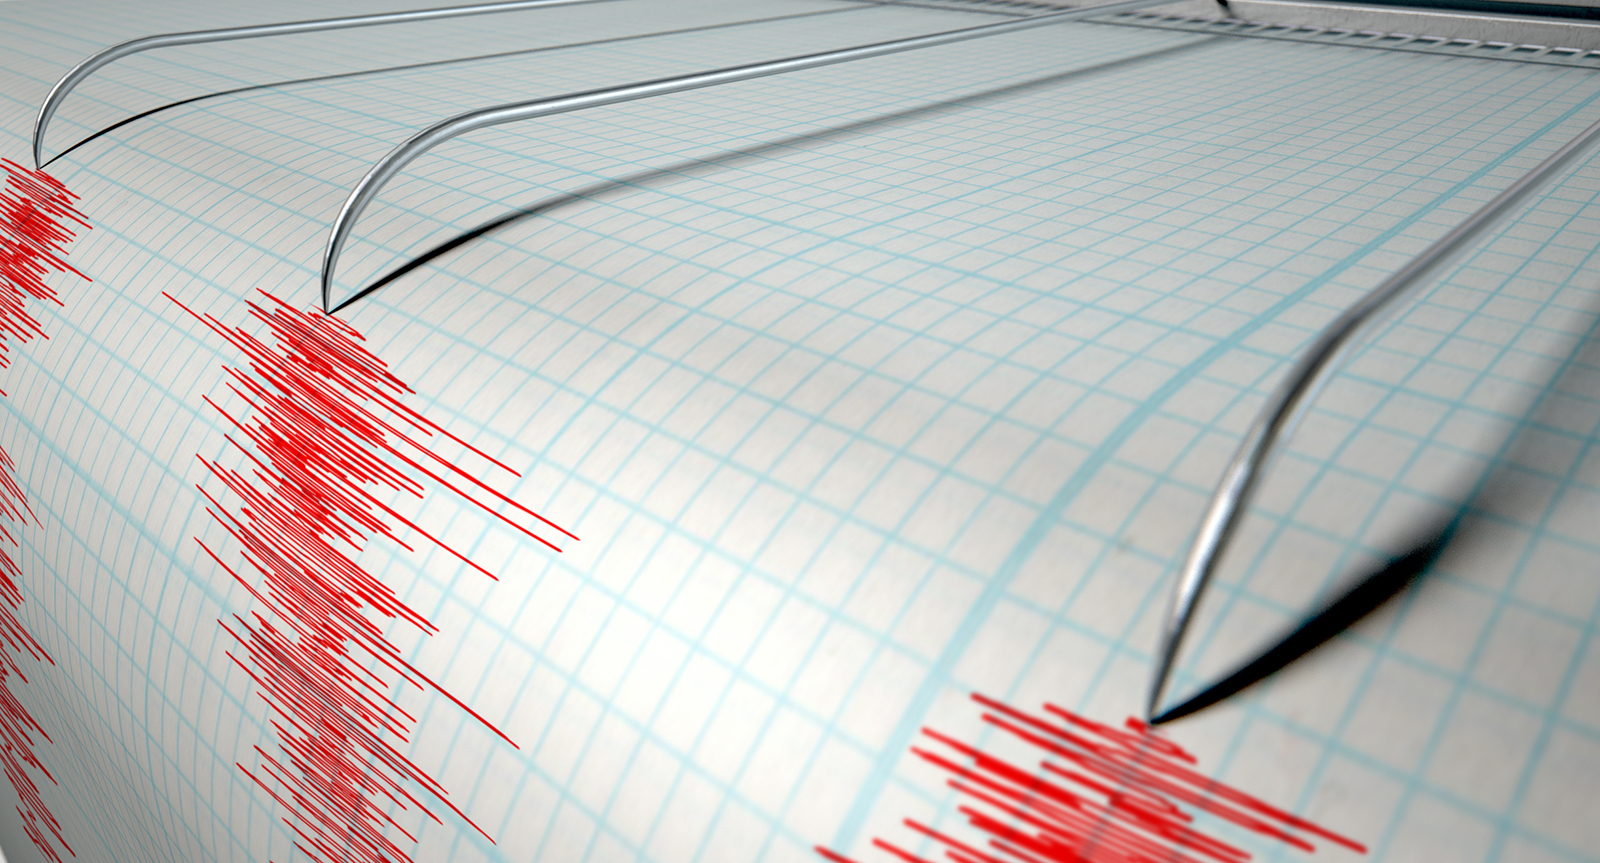 earthquake rattles central new jersey, 45 miles west of nyc